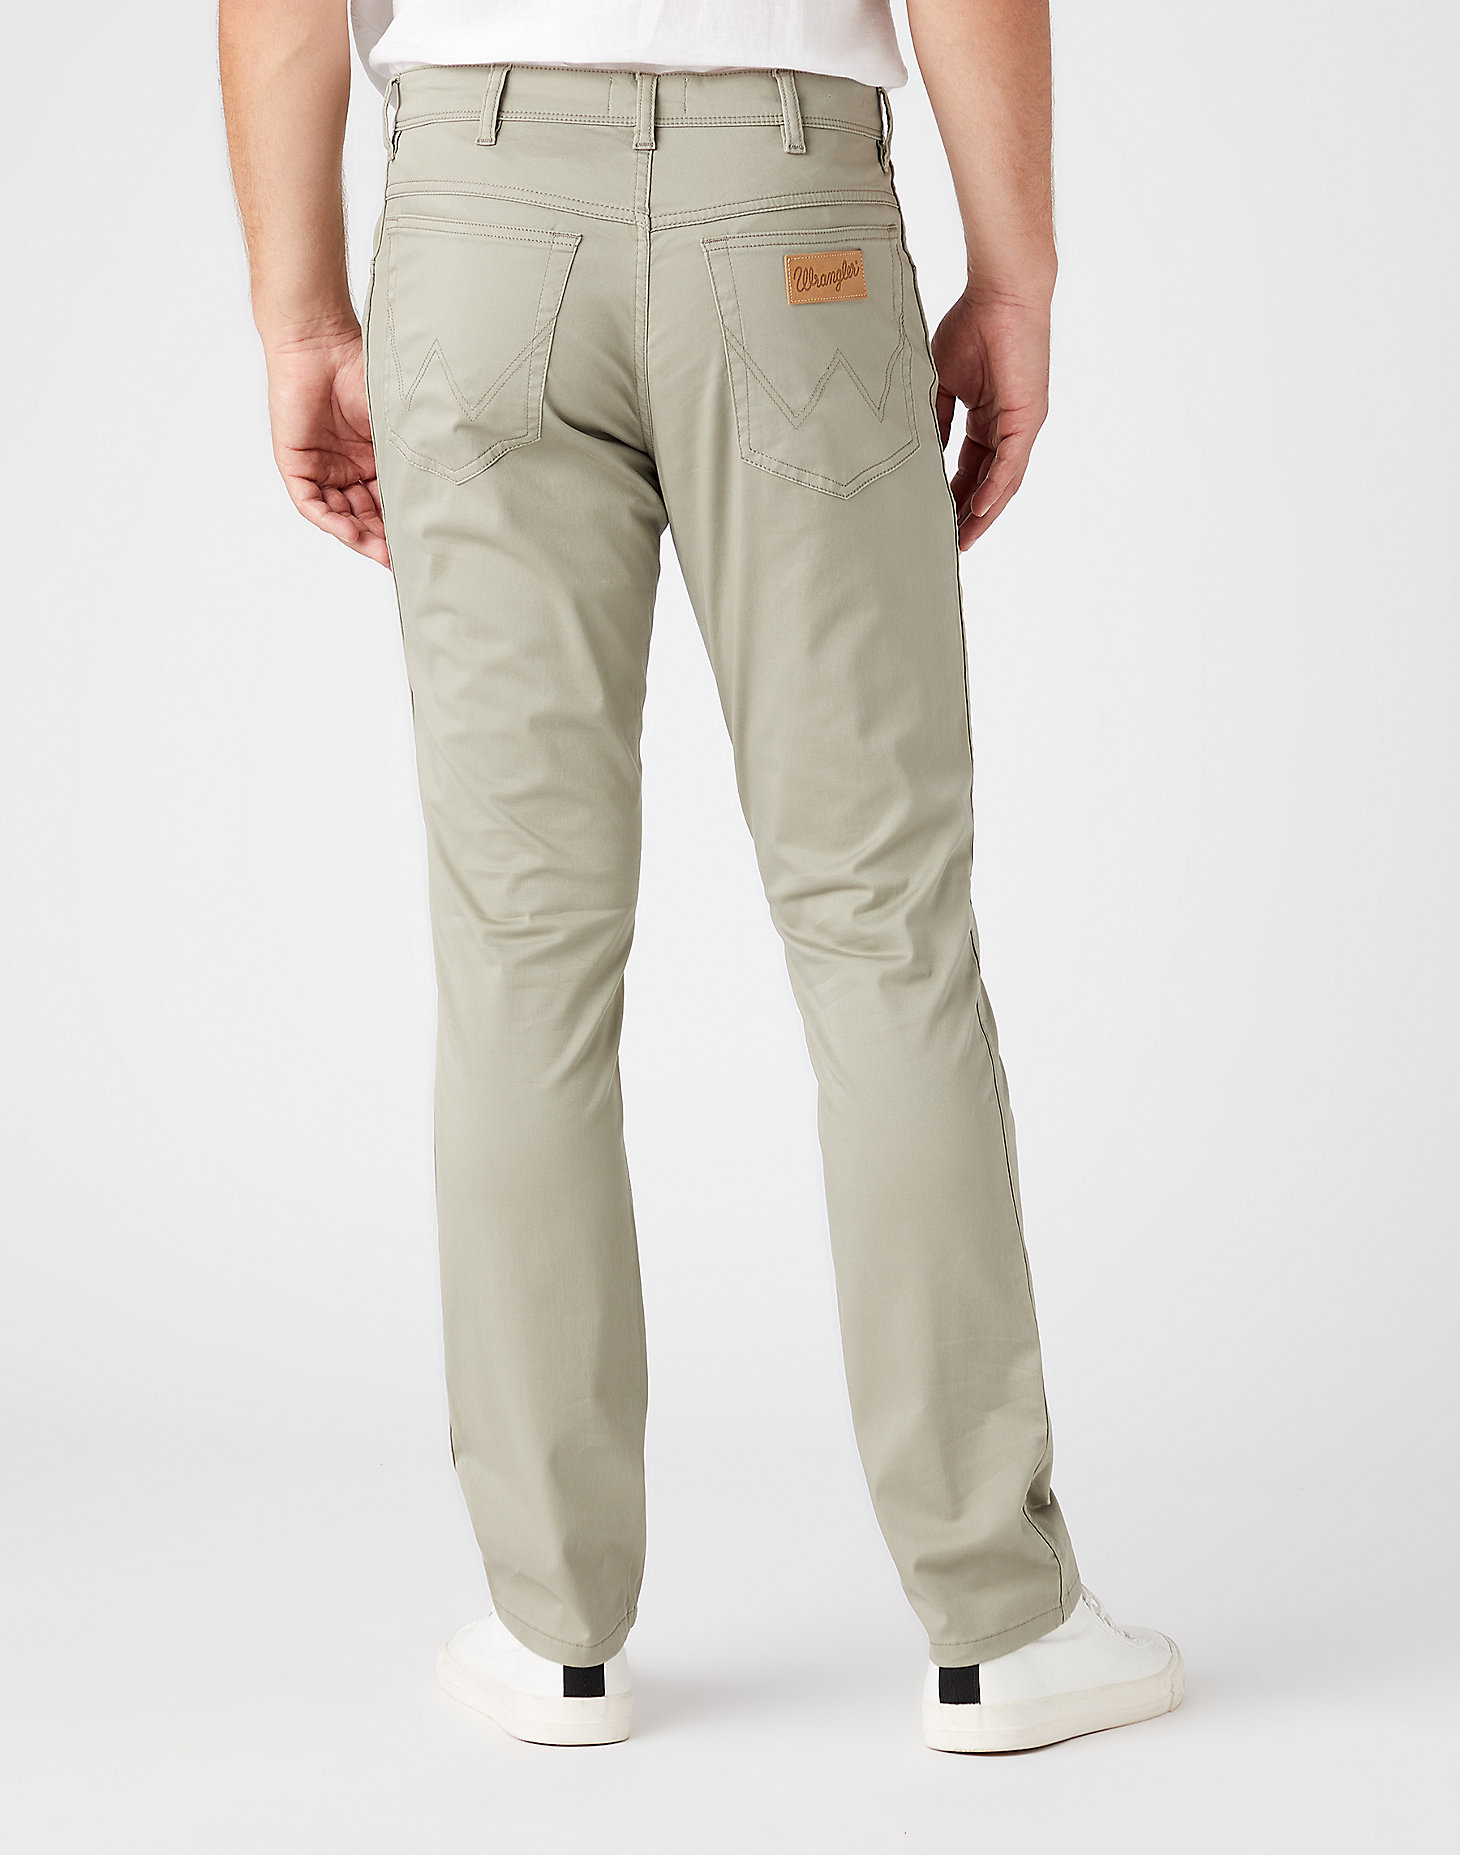 Texas Slim Trousers in Vetiver Green alternative view 2